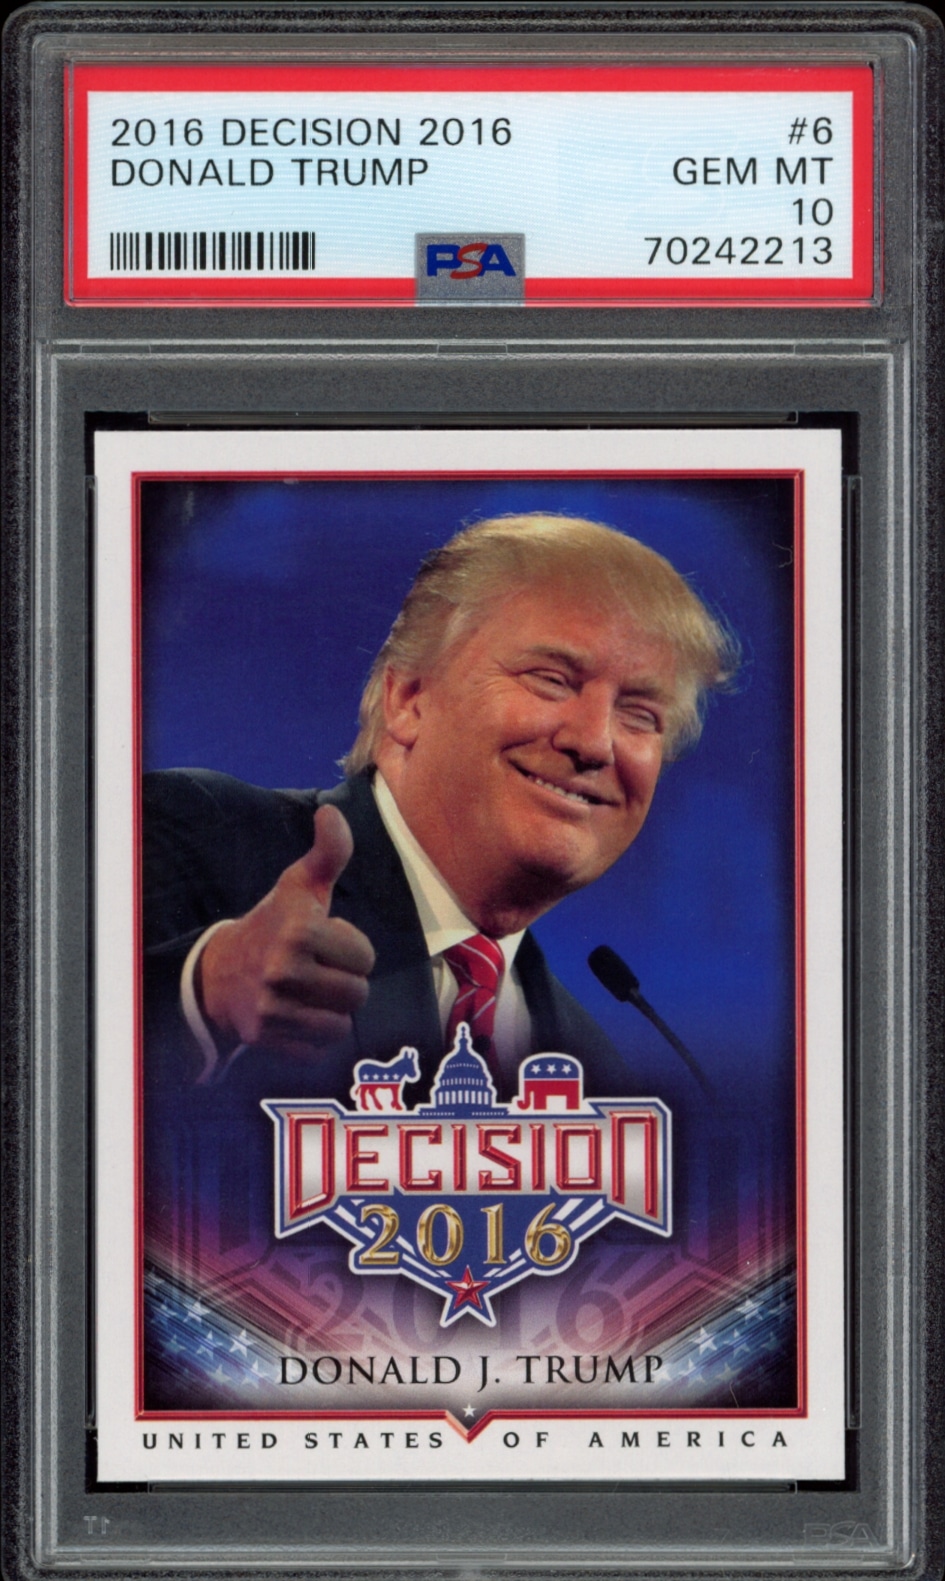 2018 Decision 2016 Donald Trump collectible card, graded Gem Mint 10 by PSA.